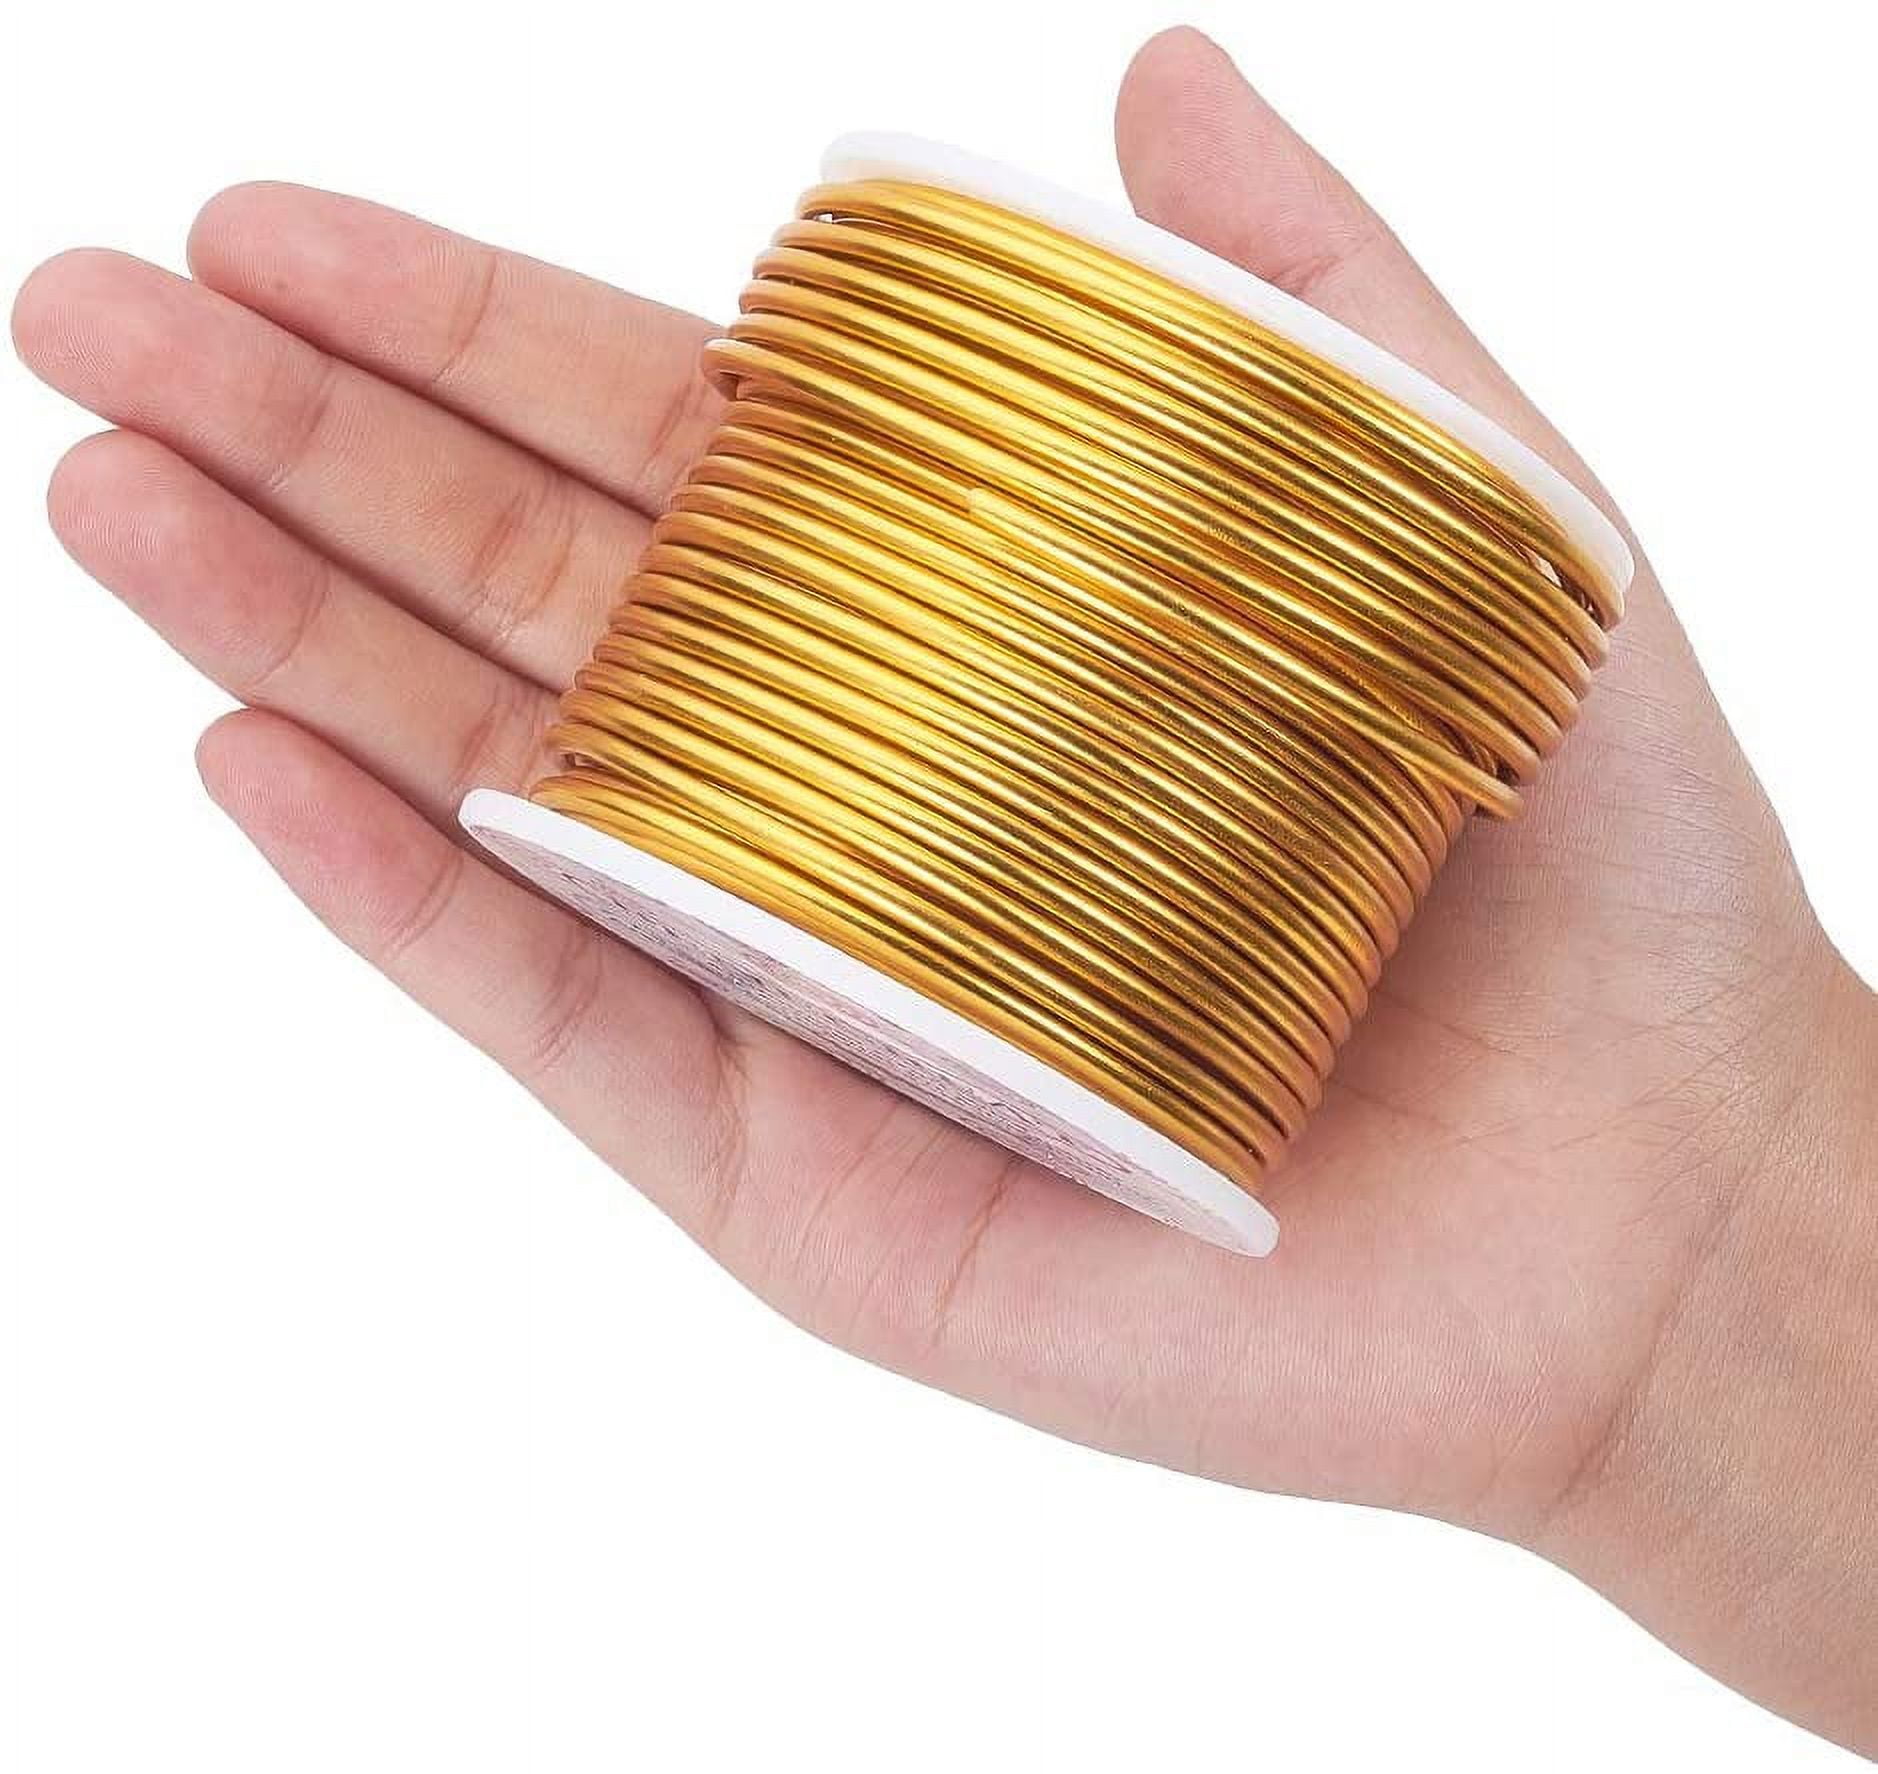 10 Gauge 80FT Tarnish Resistant Jewelry Craft Wire Bendable Aluminum  Sculpting Metal Wire for Jewelry Craft Beading Work Khaki